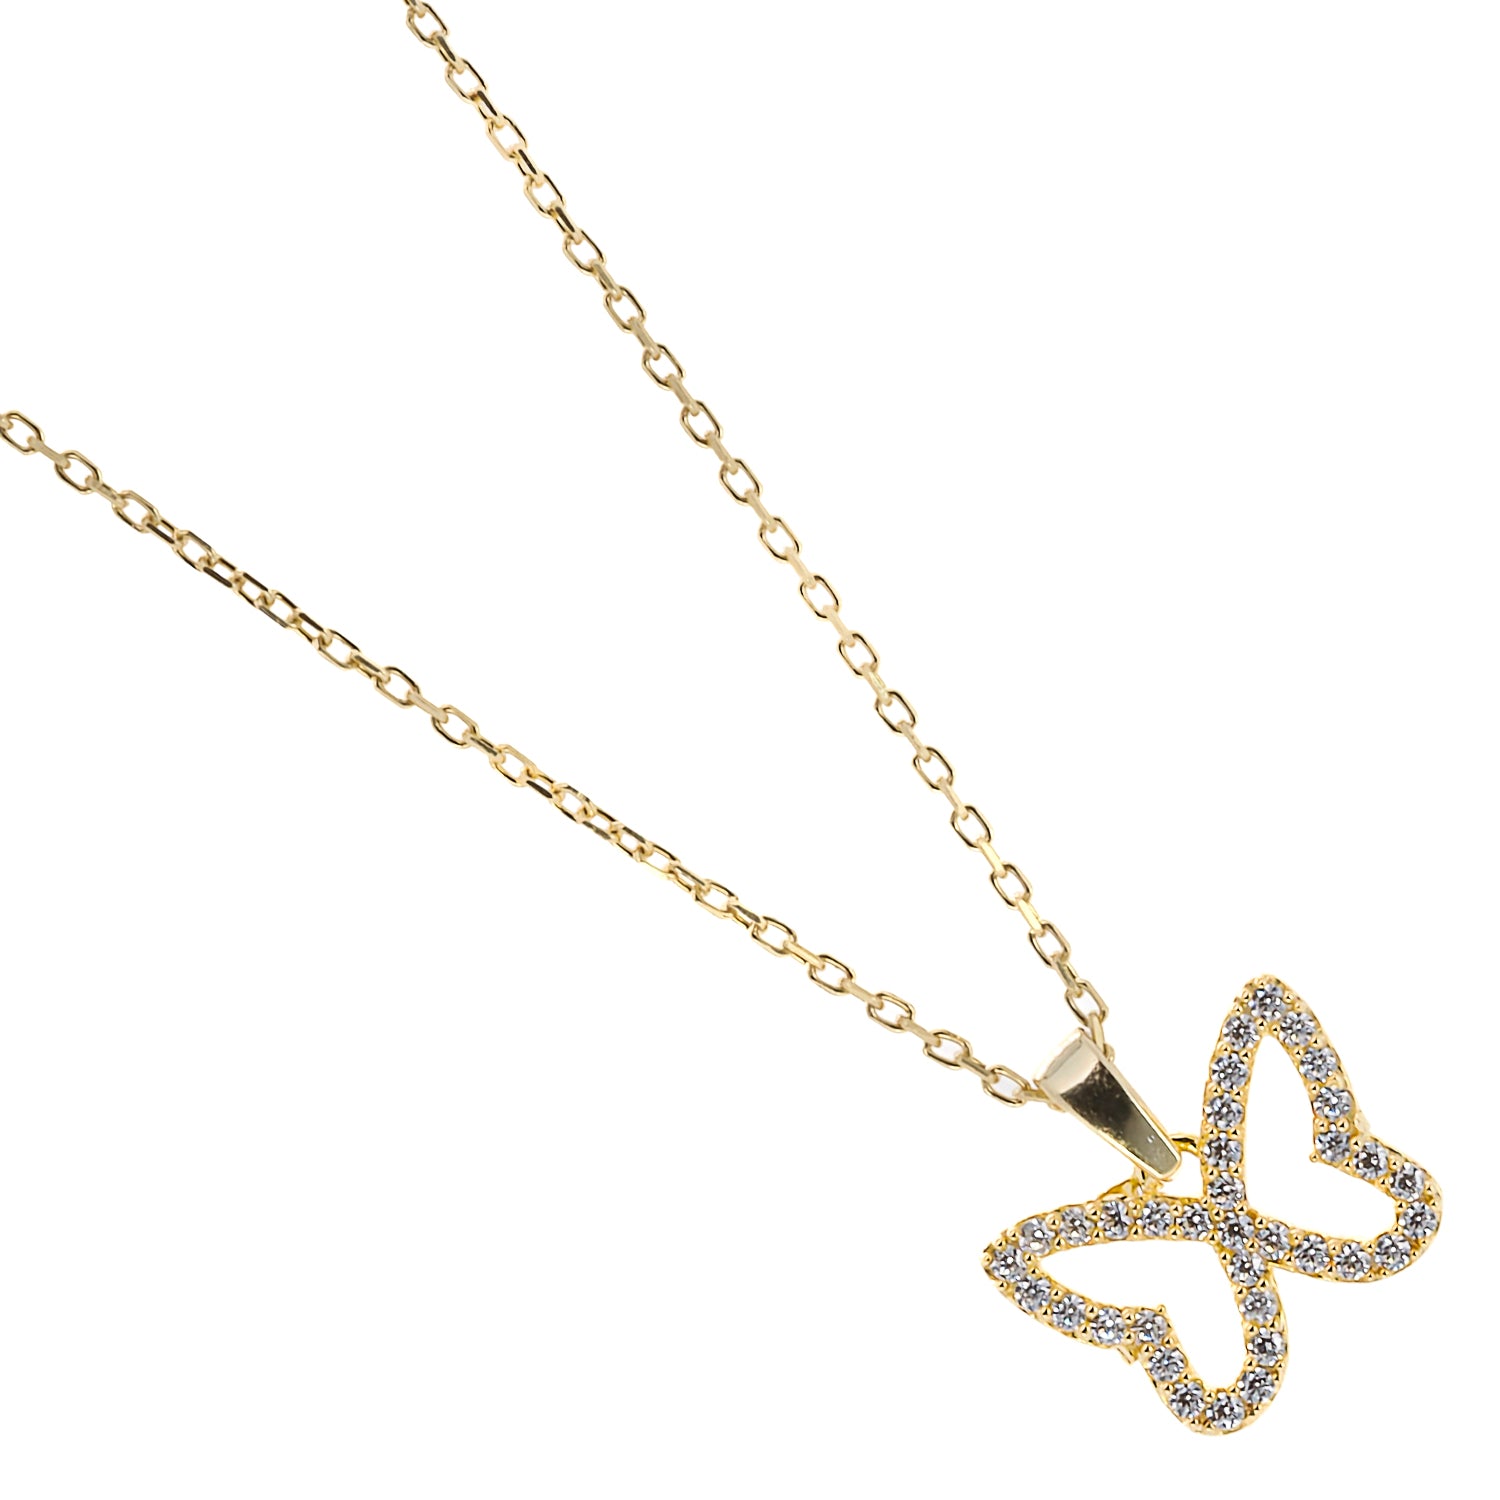 The Gold Sparkly Butterfly Necklace, a harmonious blend of elegance and grace.